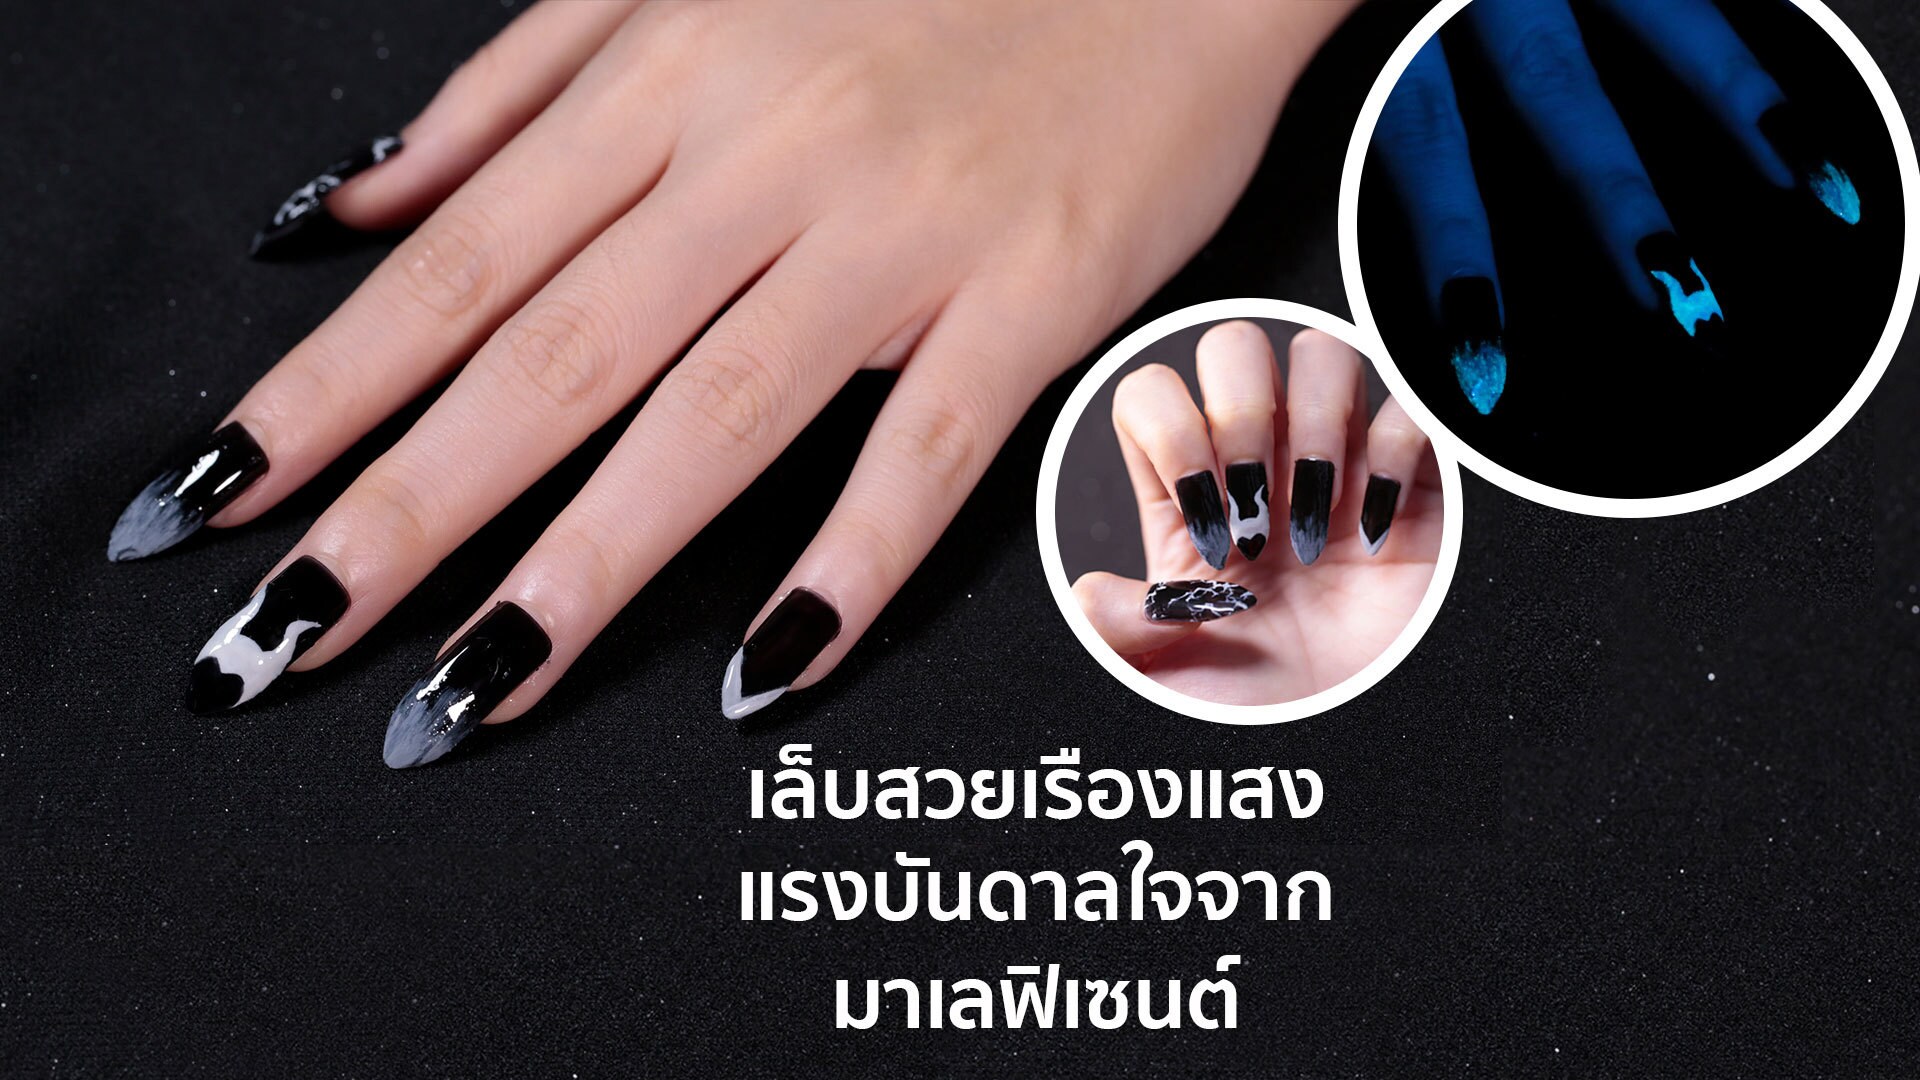 Glow-In-The-Dark Nail Art Inspired By Maleficent | Disney Style